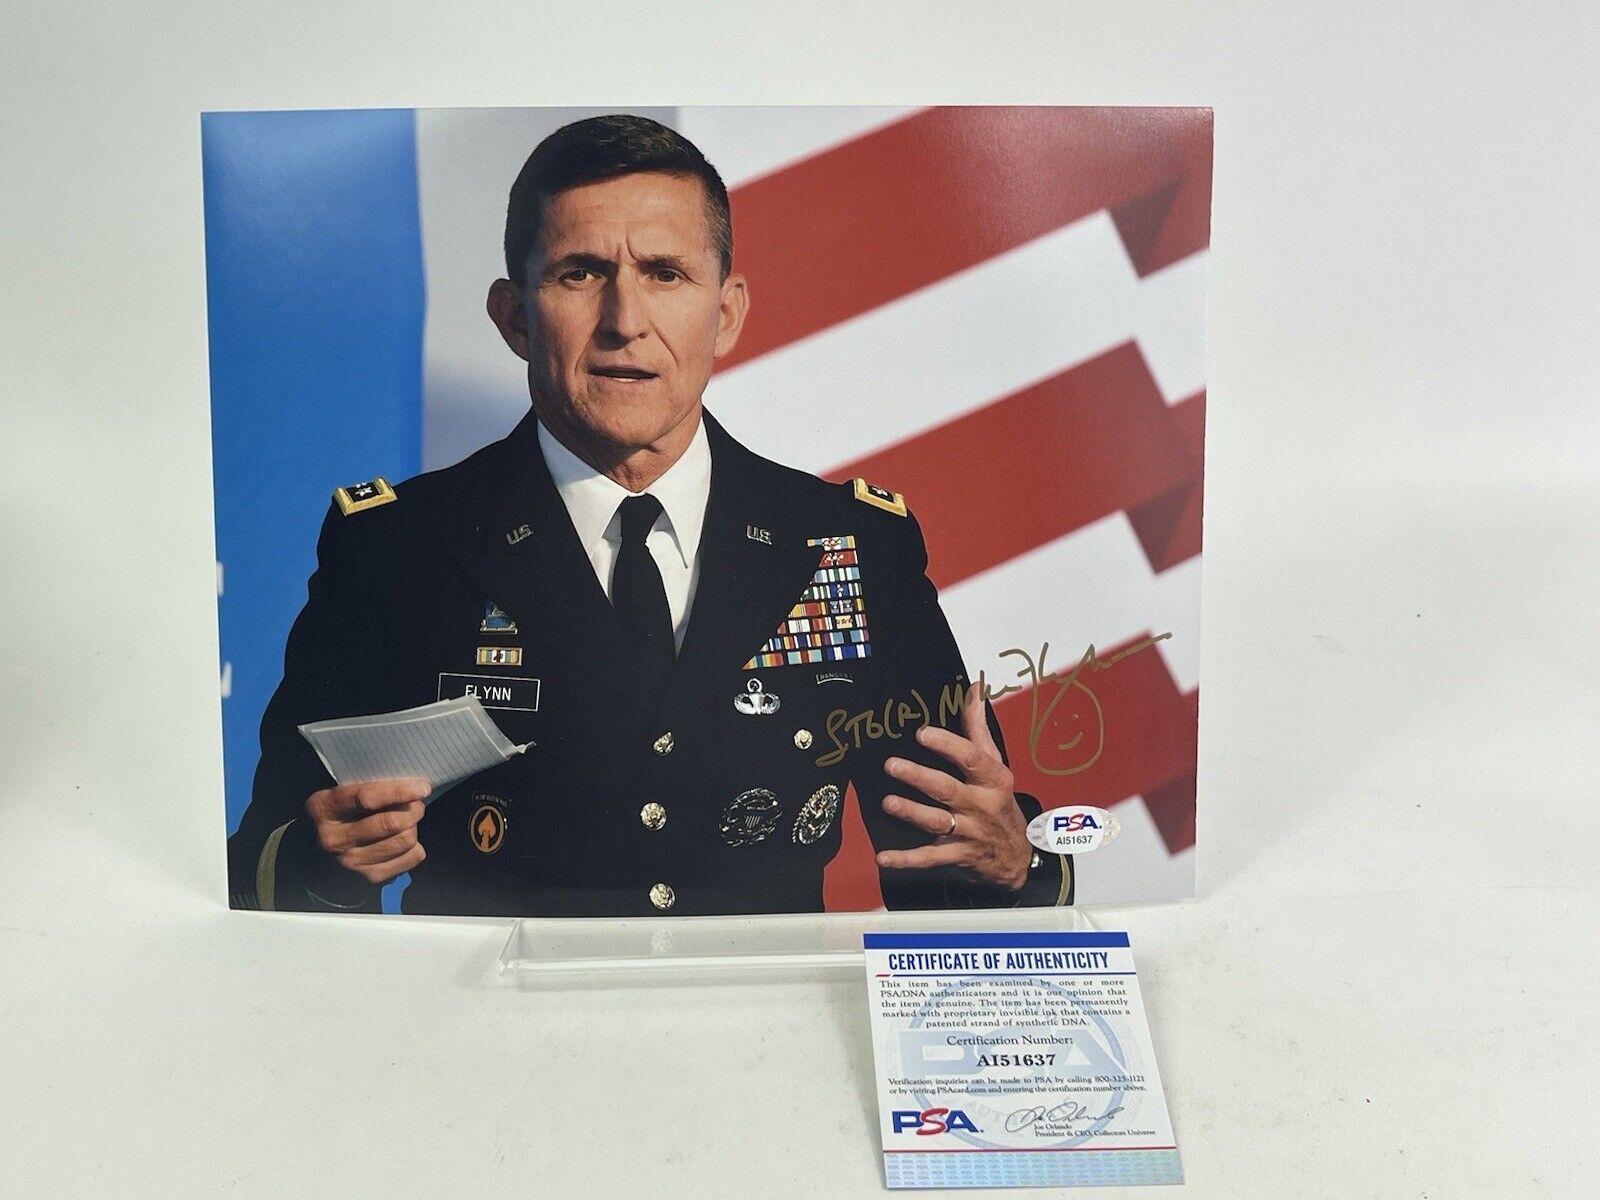 GENERAL MICHAEL FLYNN SIGNED 8X10 PHOTO PSA Certified Authentic